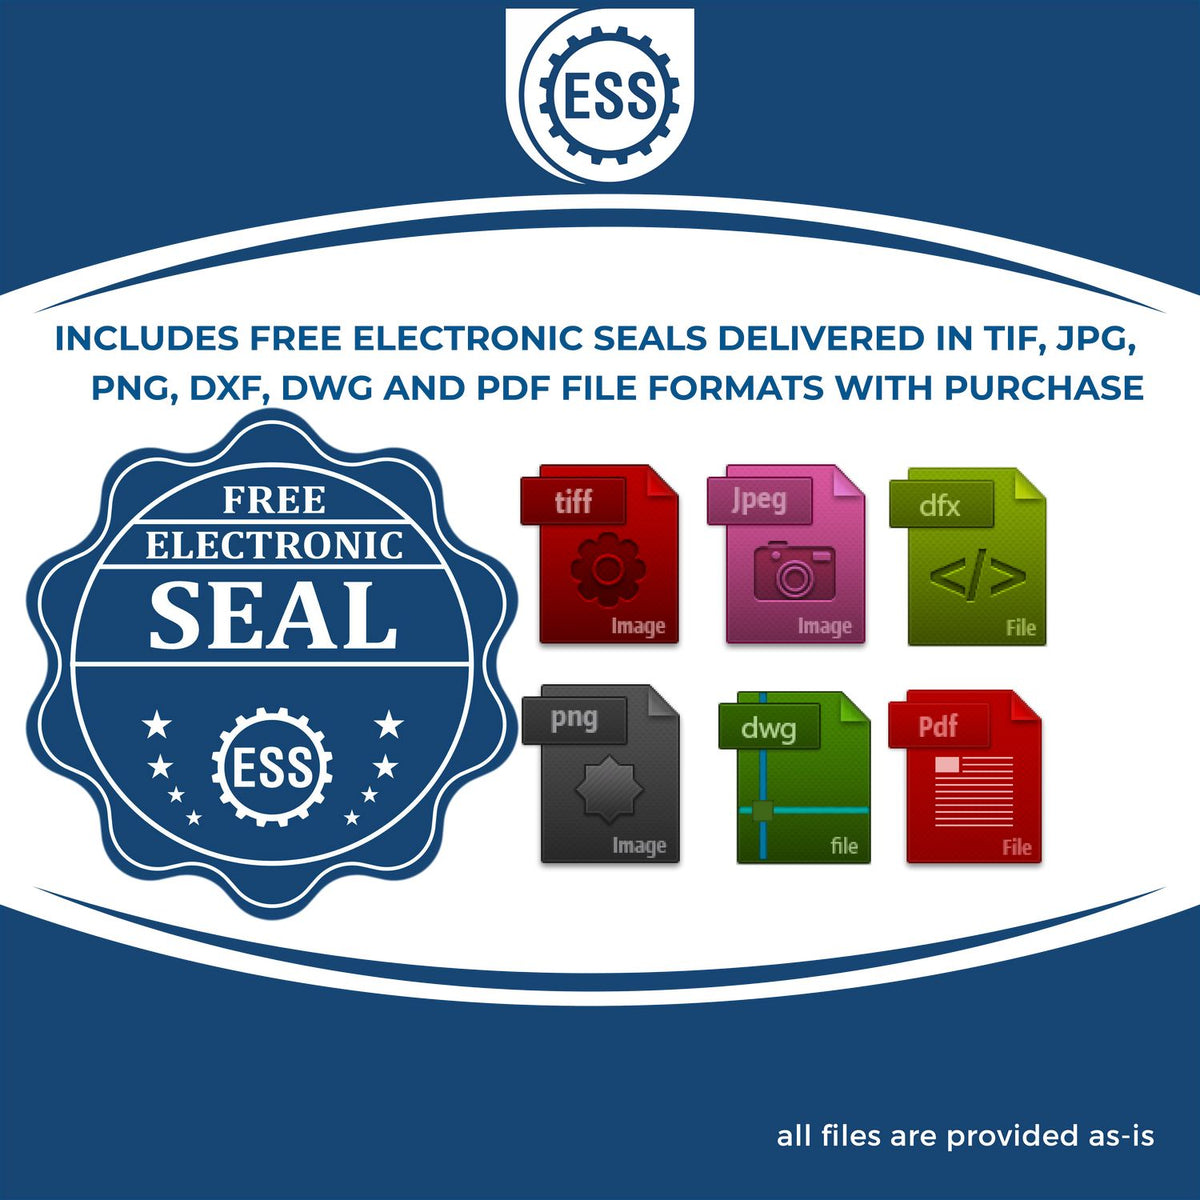 An infographic for the free electronic seal for the Gift Guam Geologist Seal illustrating the different file type icons such as DXF, DWG, TIF, JPG and PNG.